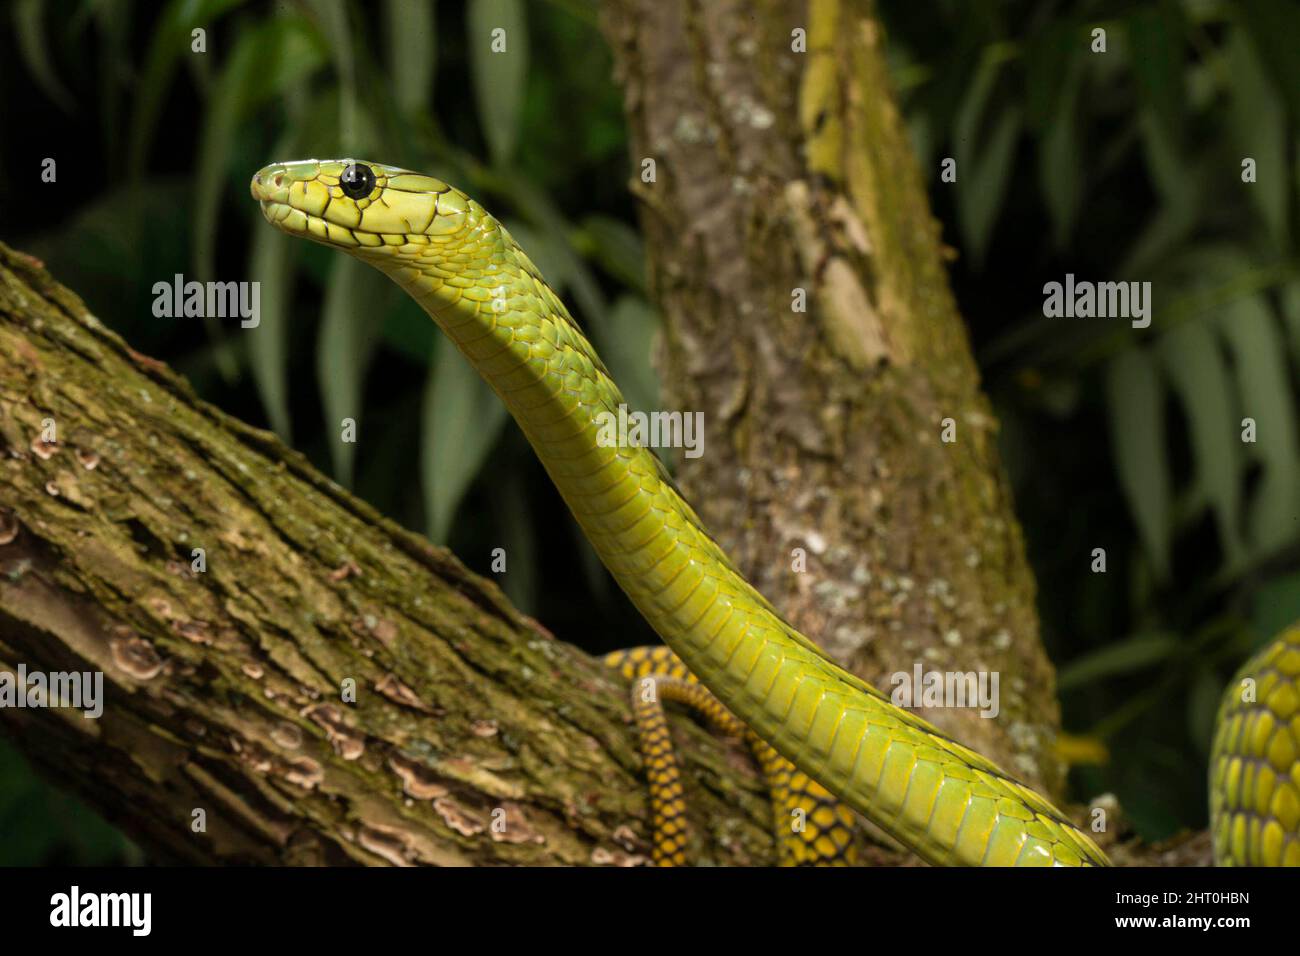 Western green mamba (Dendroaspis viridis), a very dangerous slender snake that can grow to 2.4 m but is usually between 1.4 and 2.1 metres long. It se Stock Photo